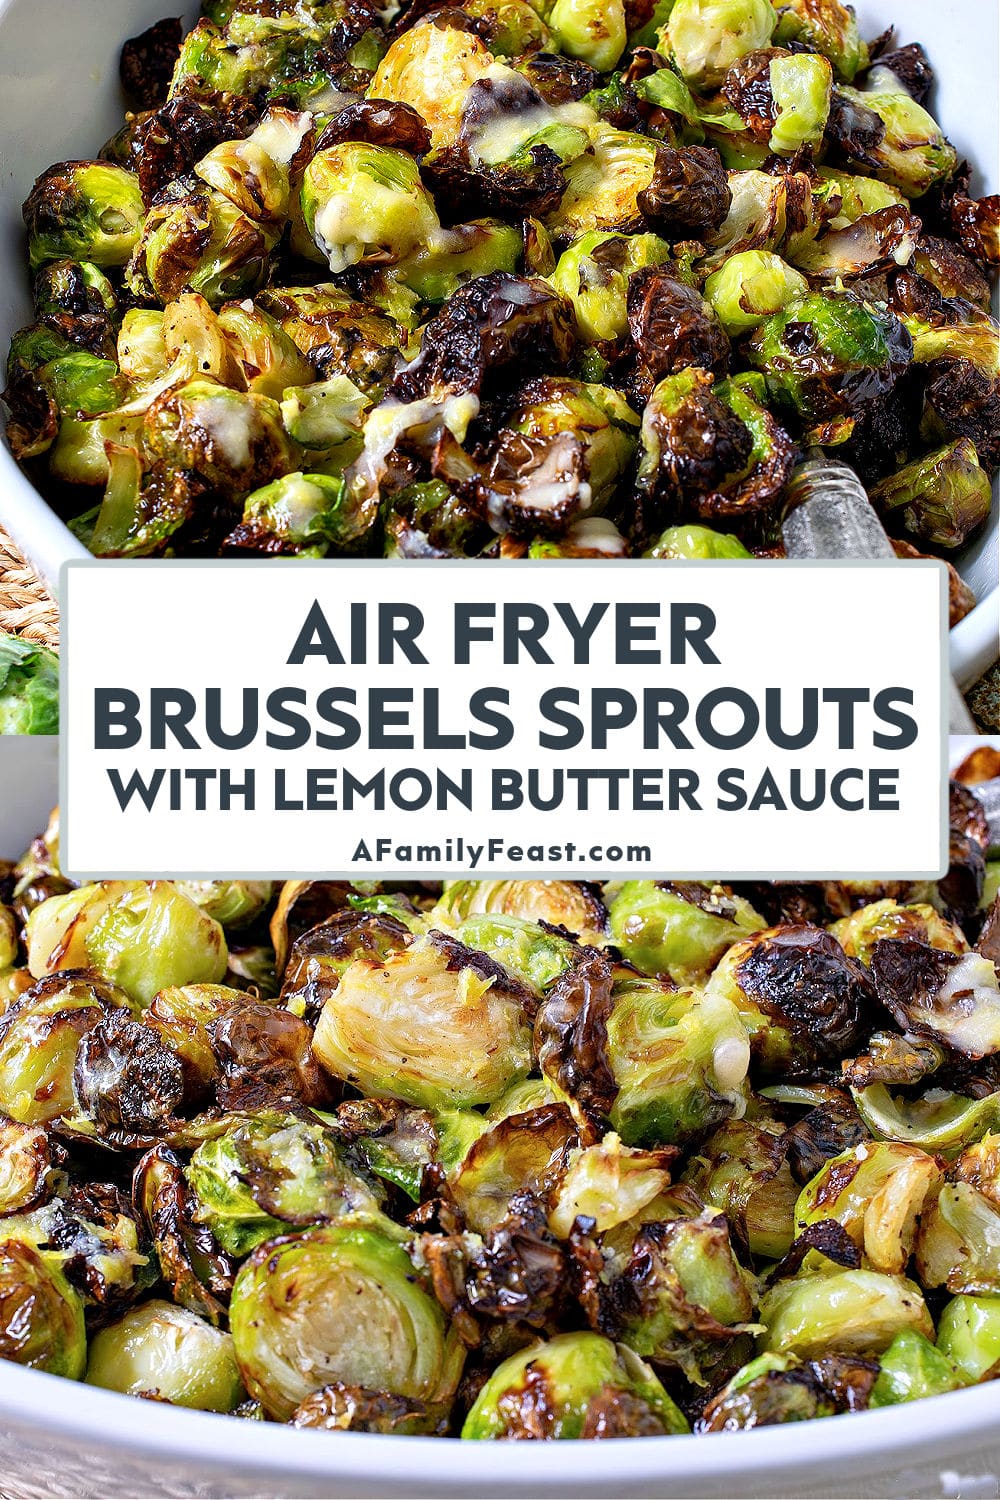 Air Fryer Brussels Sprouts with Lemon Butter Sauce - A Family Feast